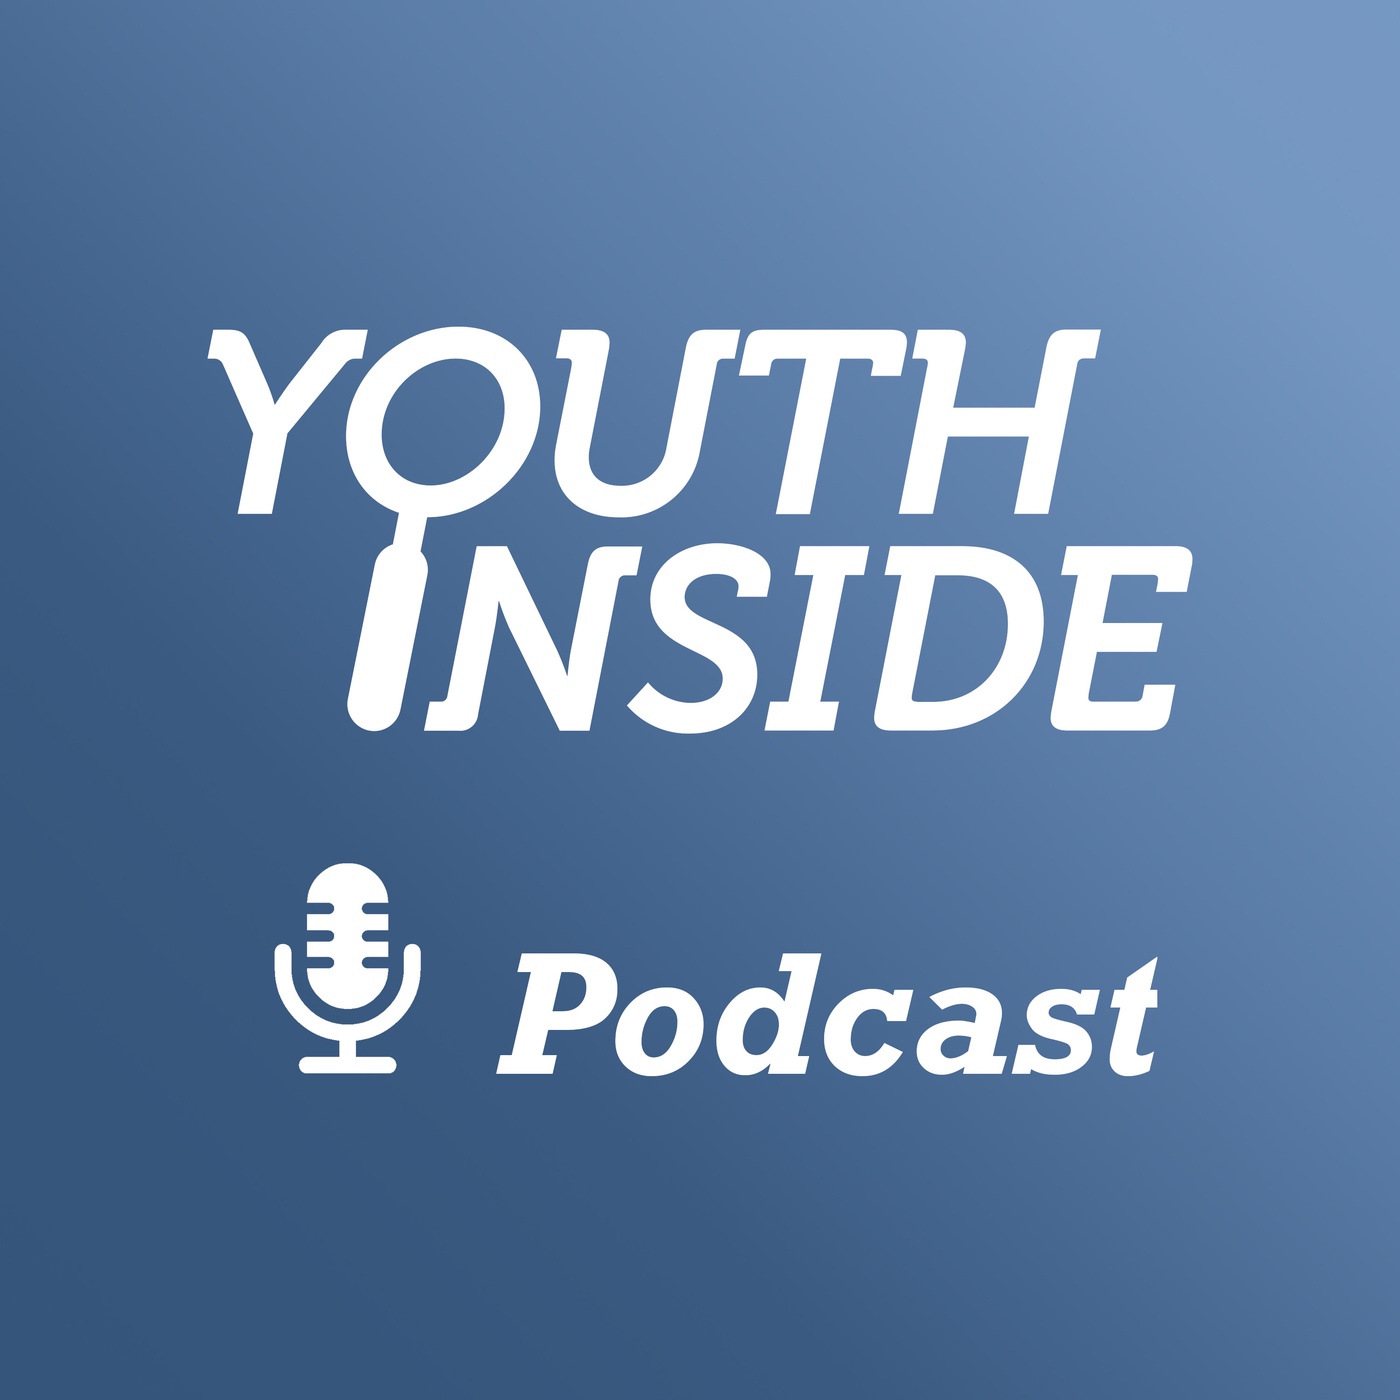 Youth Inside Podcast